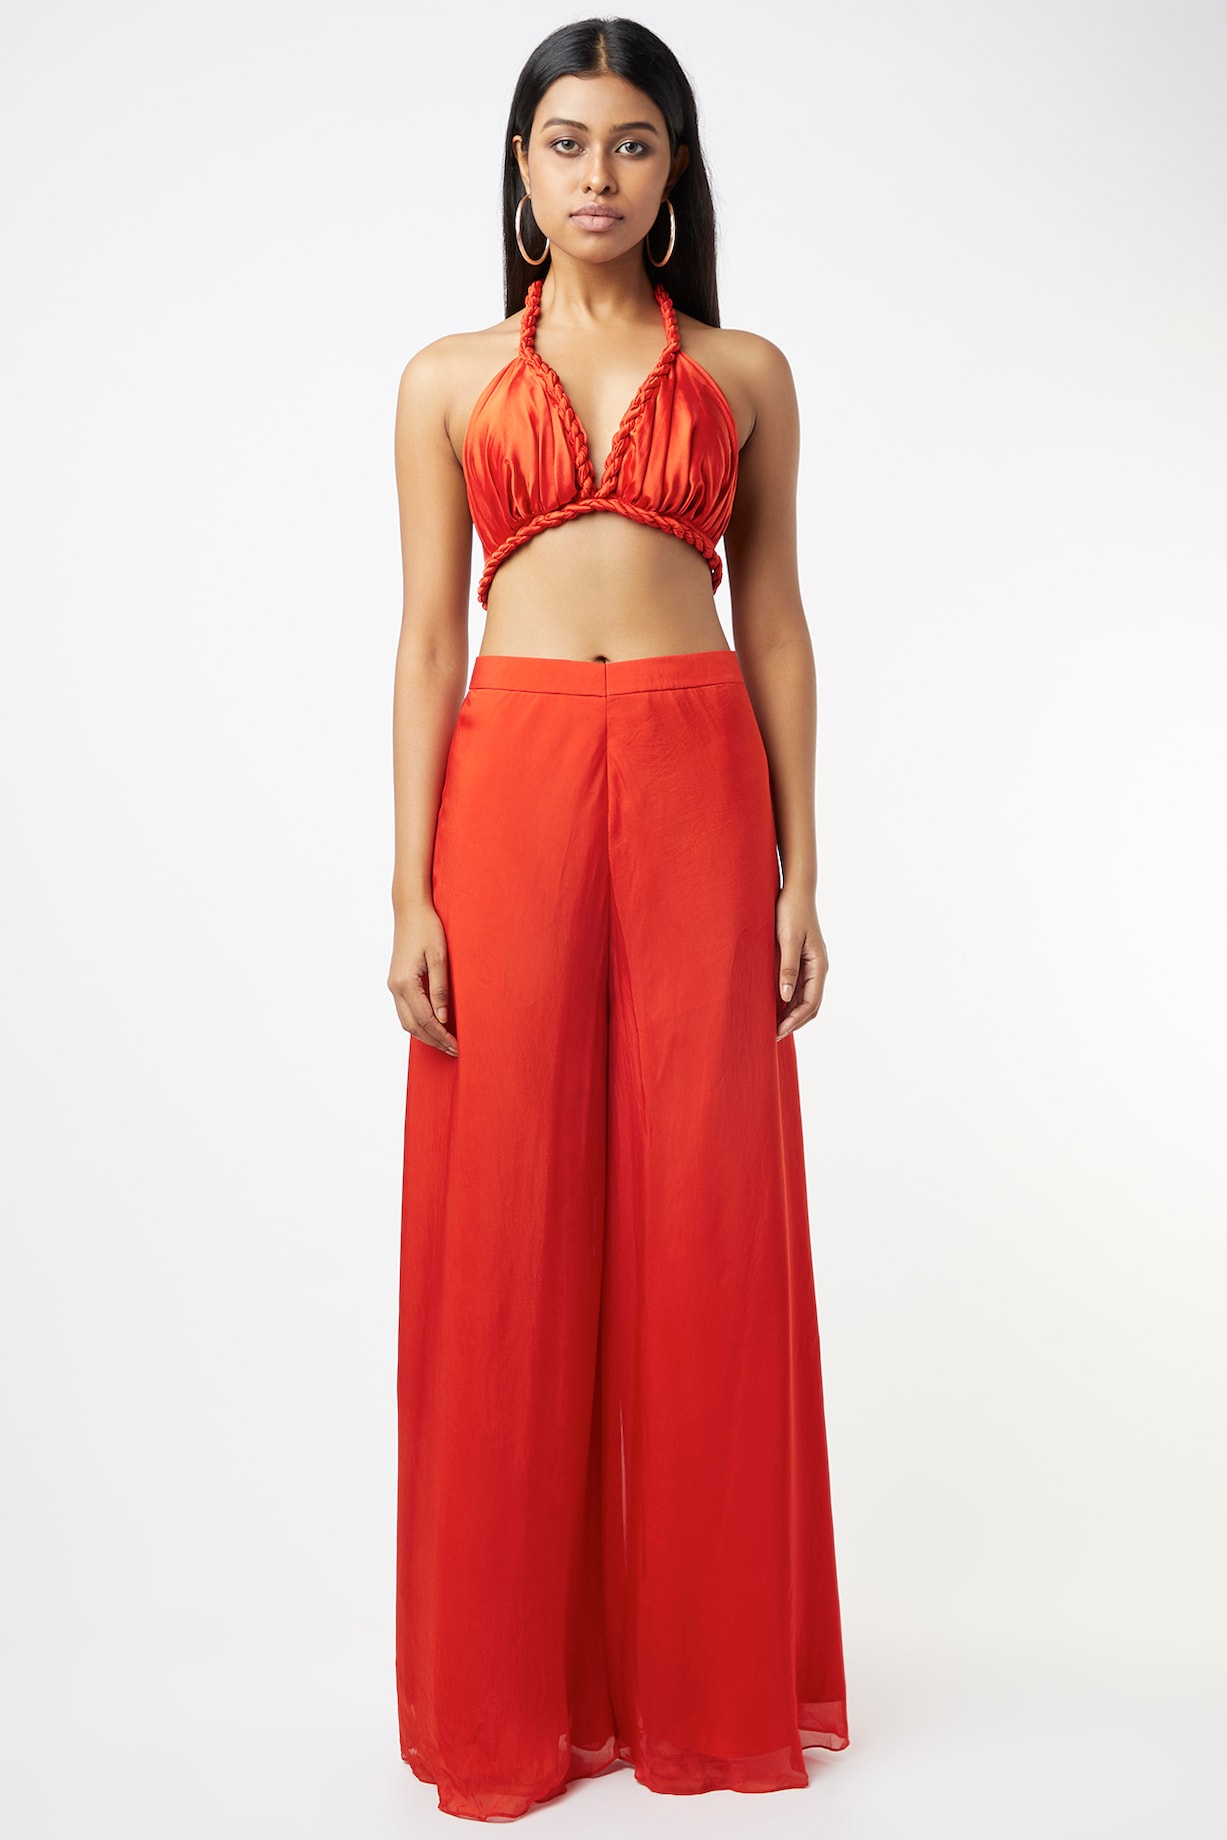 Tangerine Satin Palazzo Pant Set With Cape Design by Deme by Gabriella at  Pernia's Pop Up Shop 2024